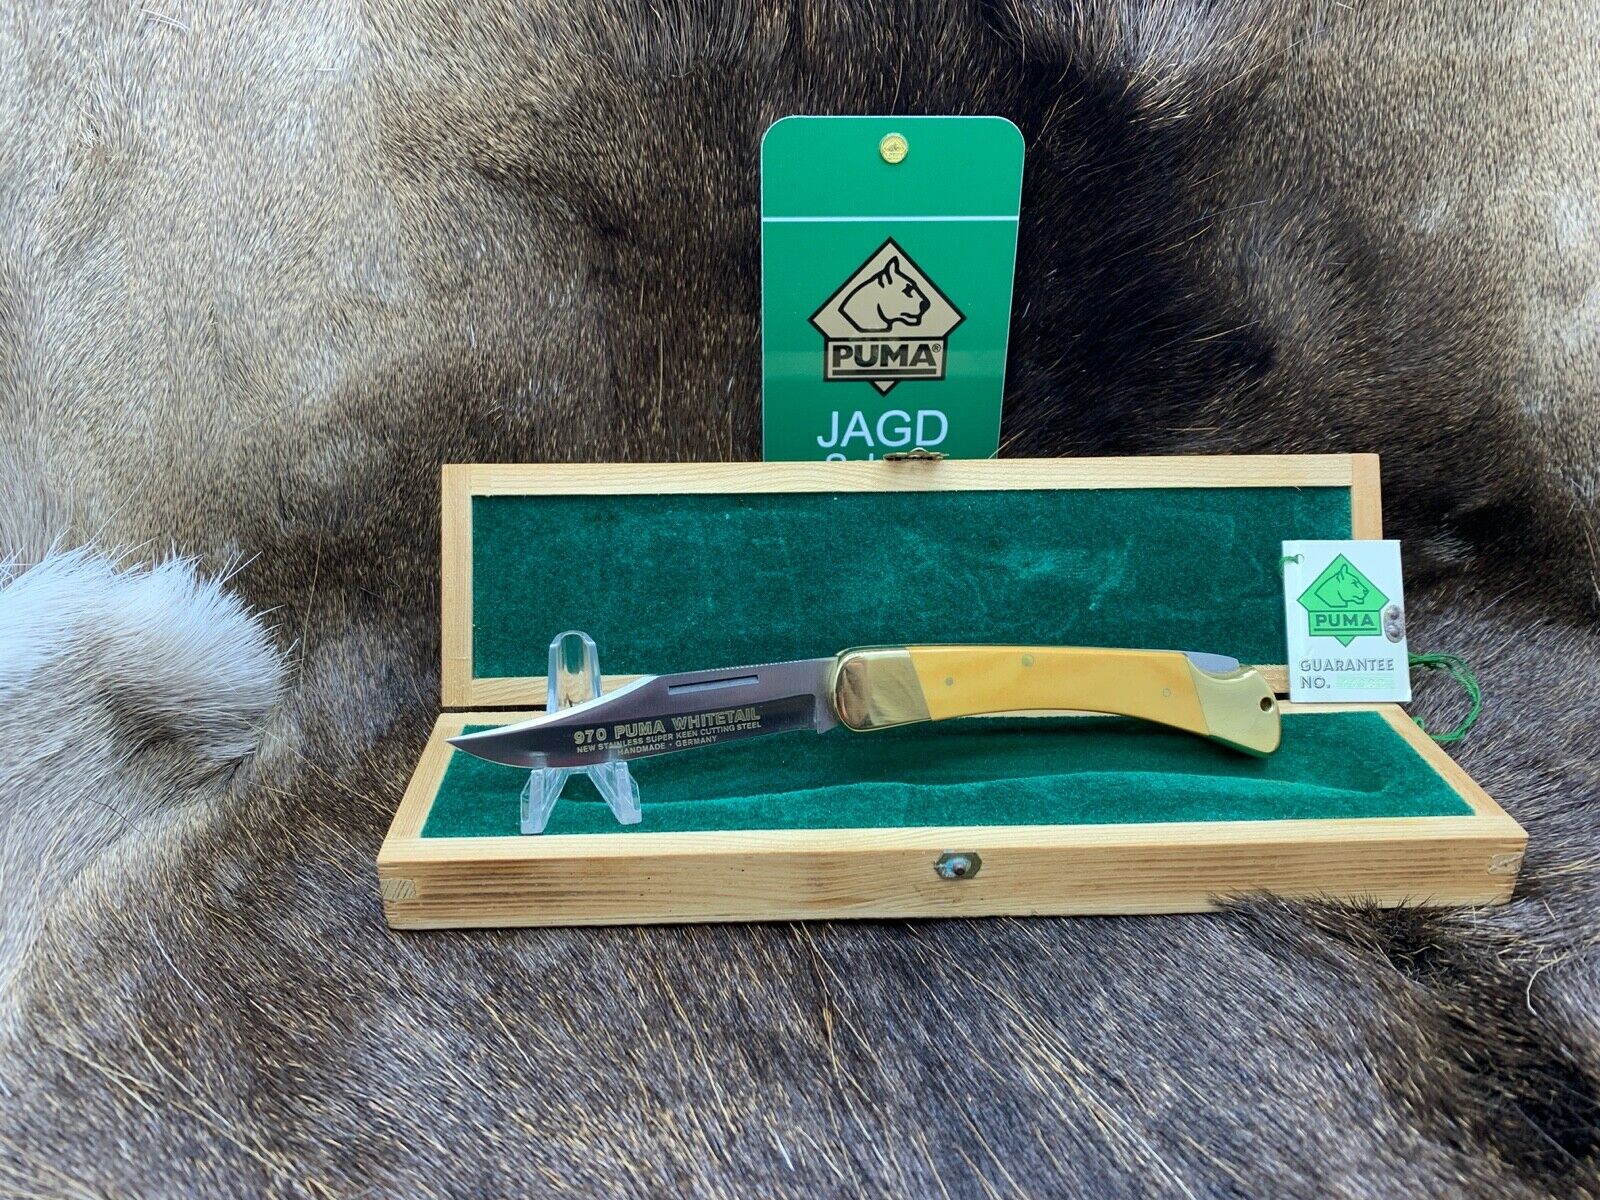 1988 PUMA 970 Whitetail Knife With Micarta Handles Mint In Presentation Box+Tag